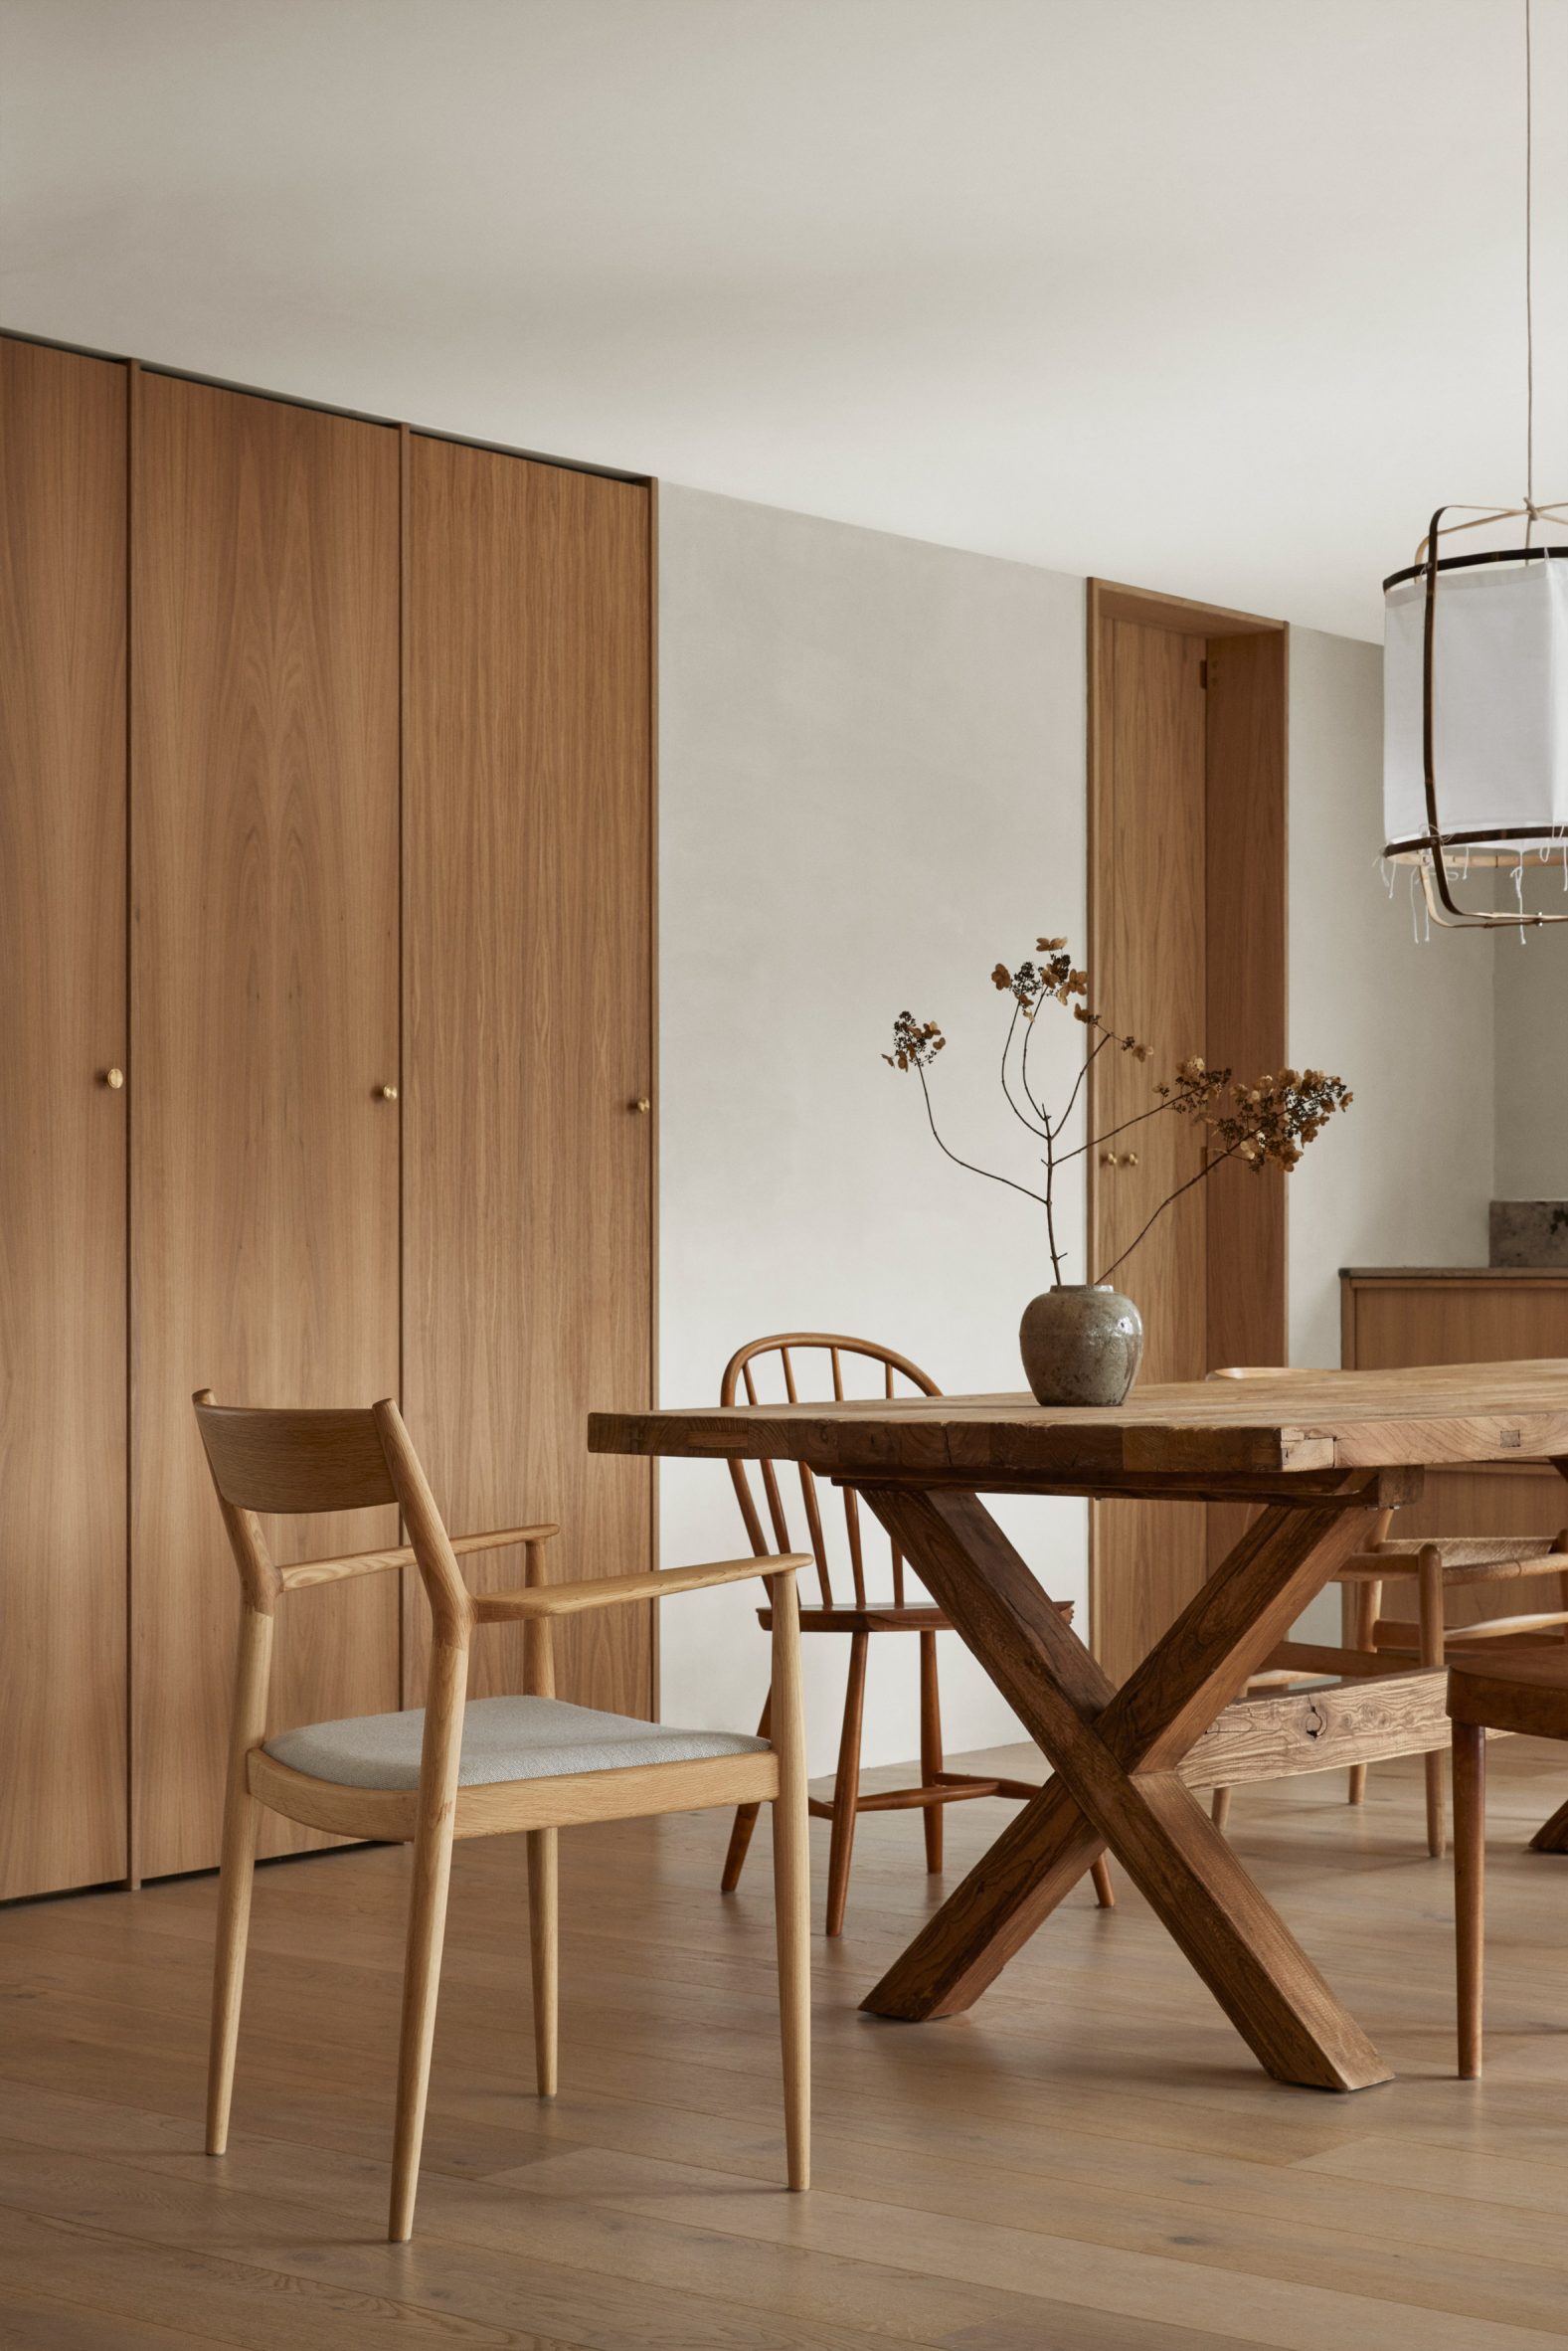 Wooden dining table and chairs in forest retreat designed by Norm Architects